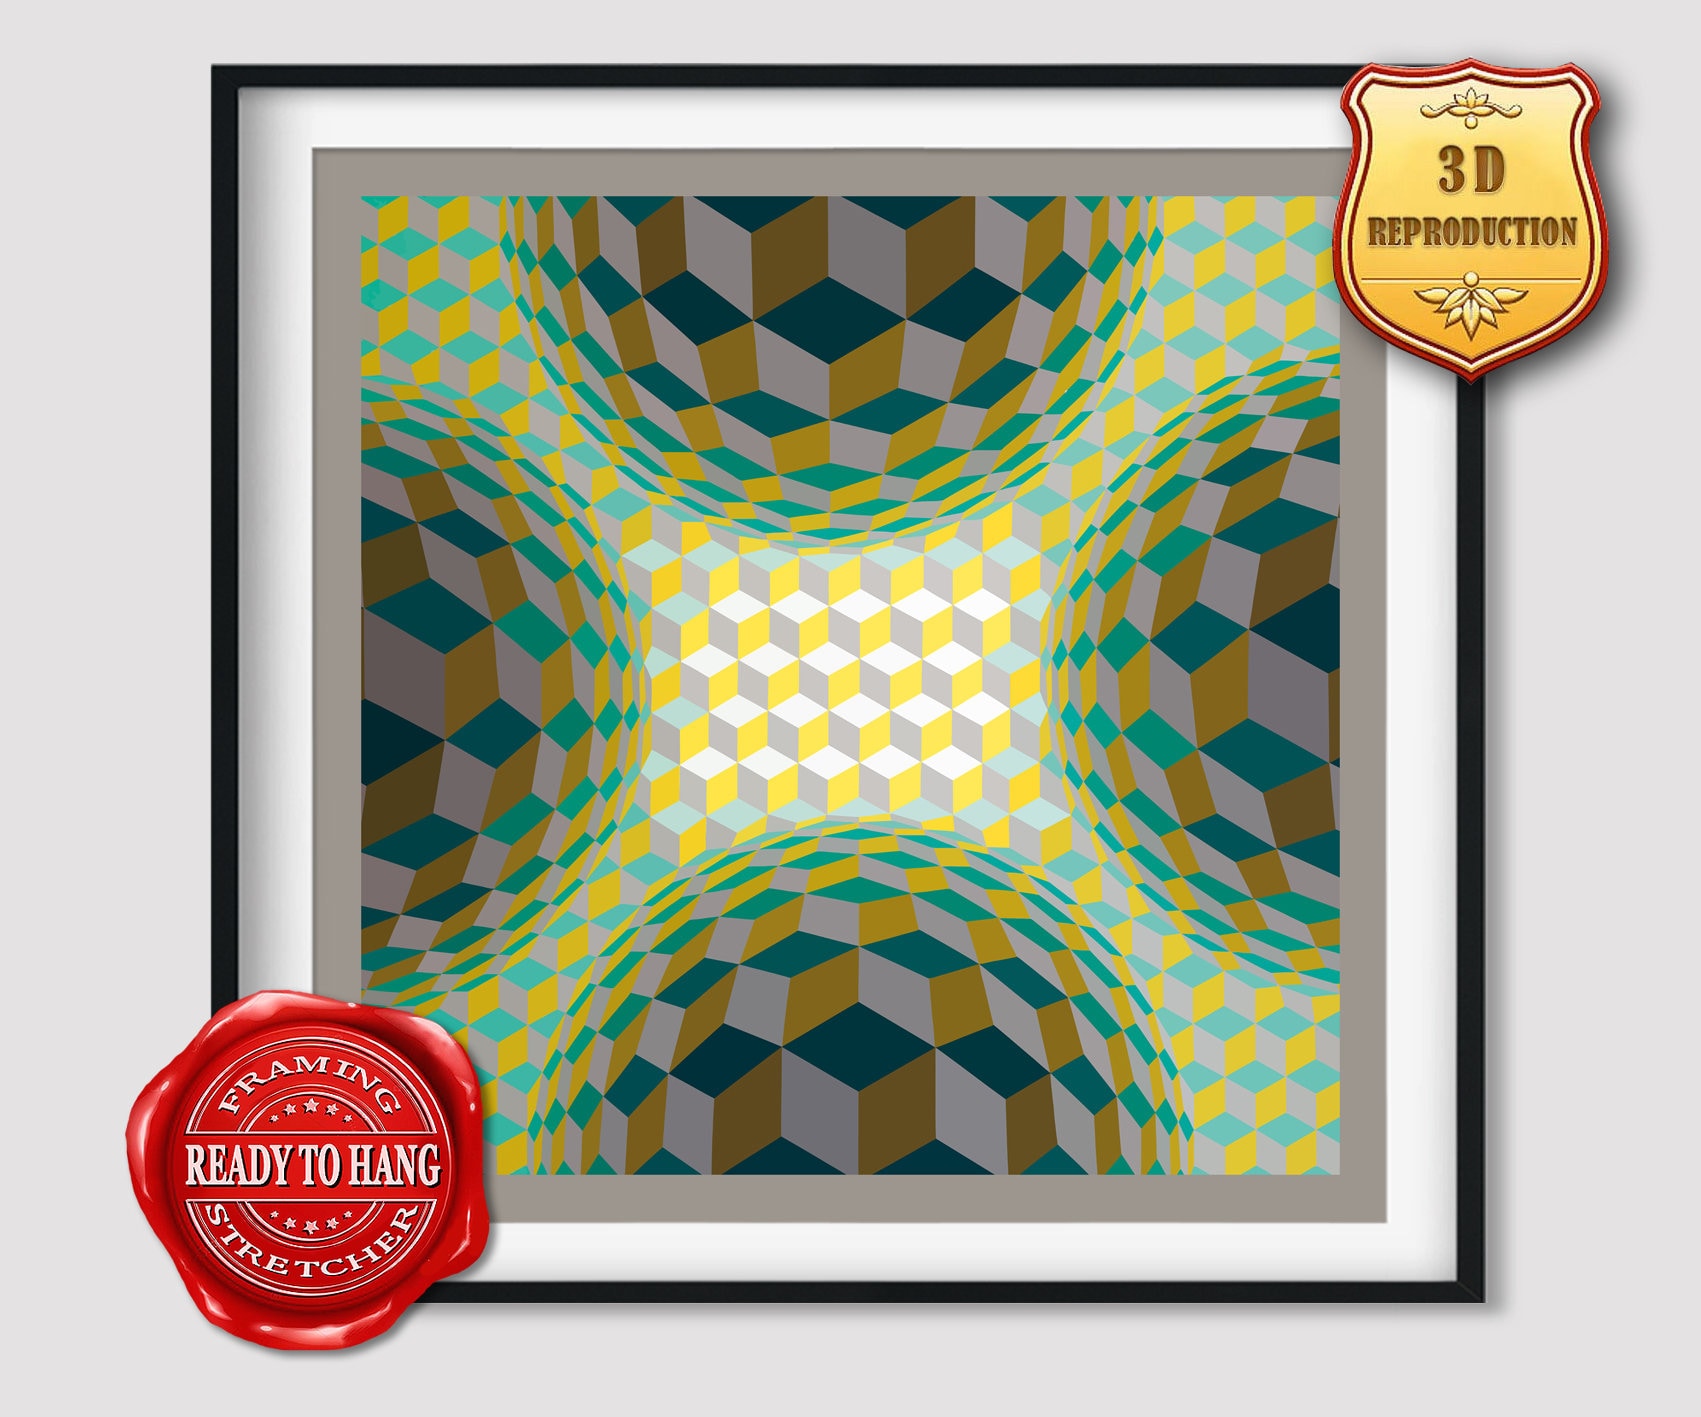 Composition61, Victor Vasarely, 1961, Op Art Movement, Geometric